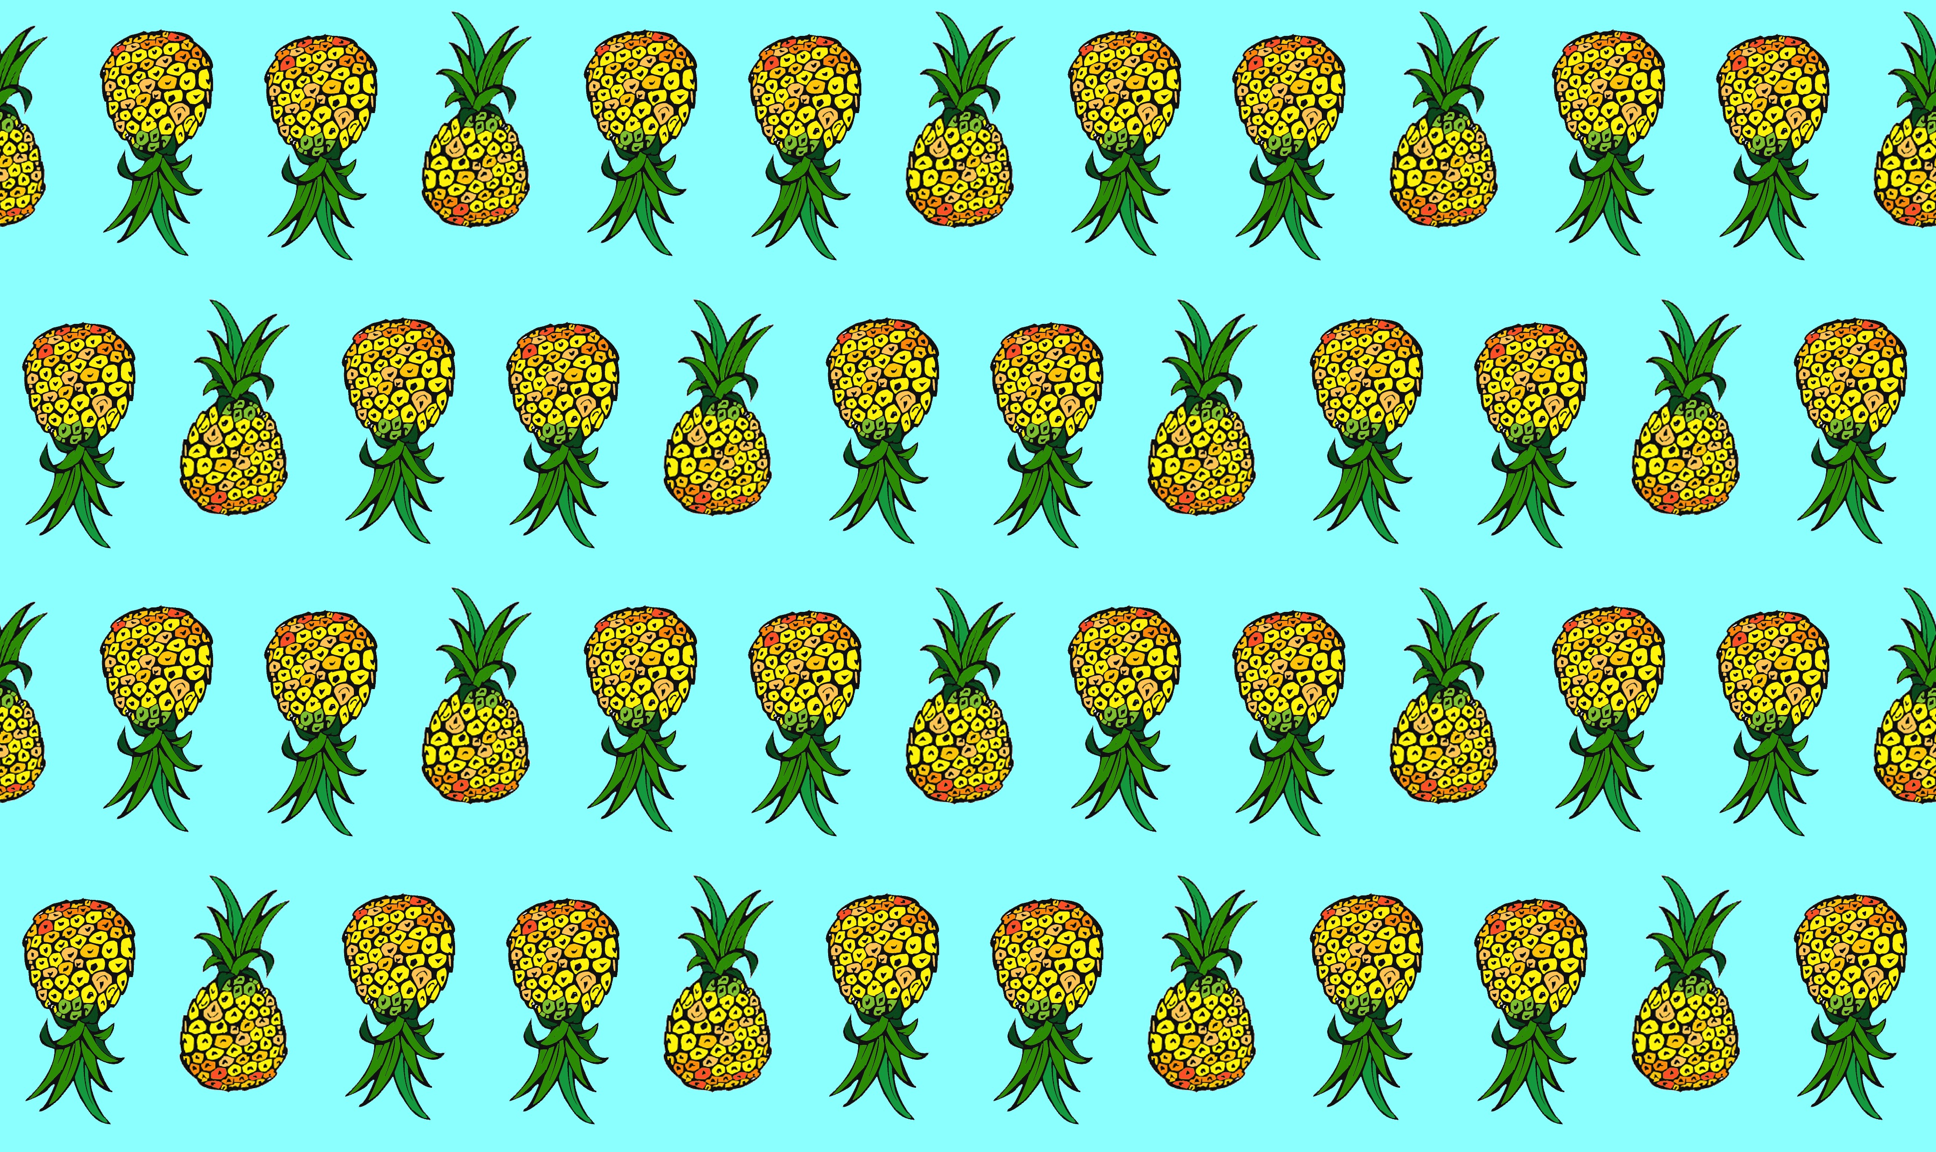 Pineapple Print Background Tiny pineapples on turquoise